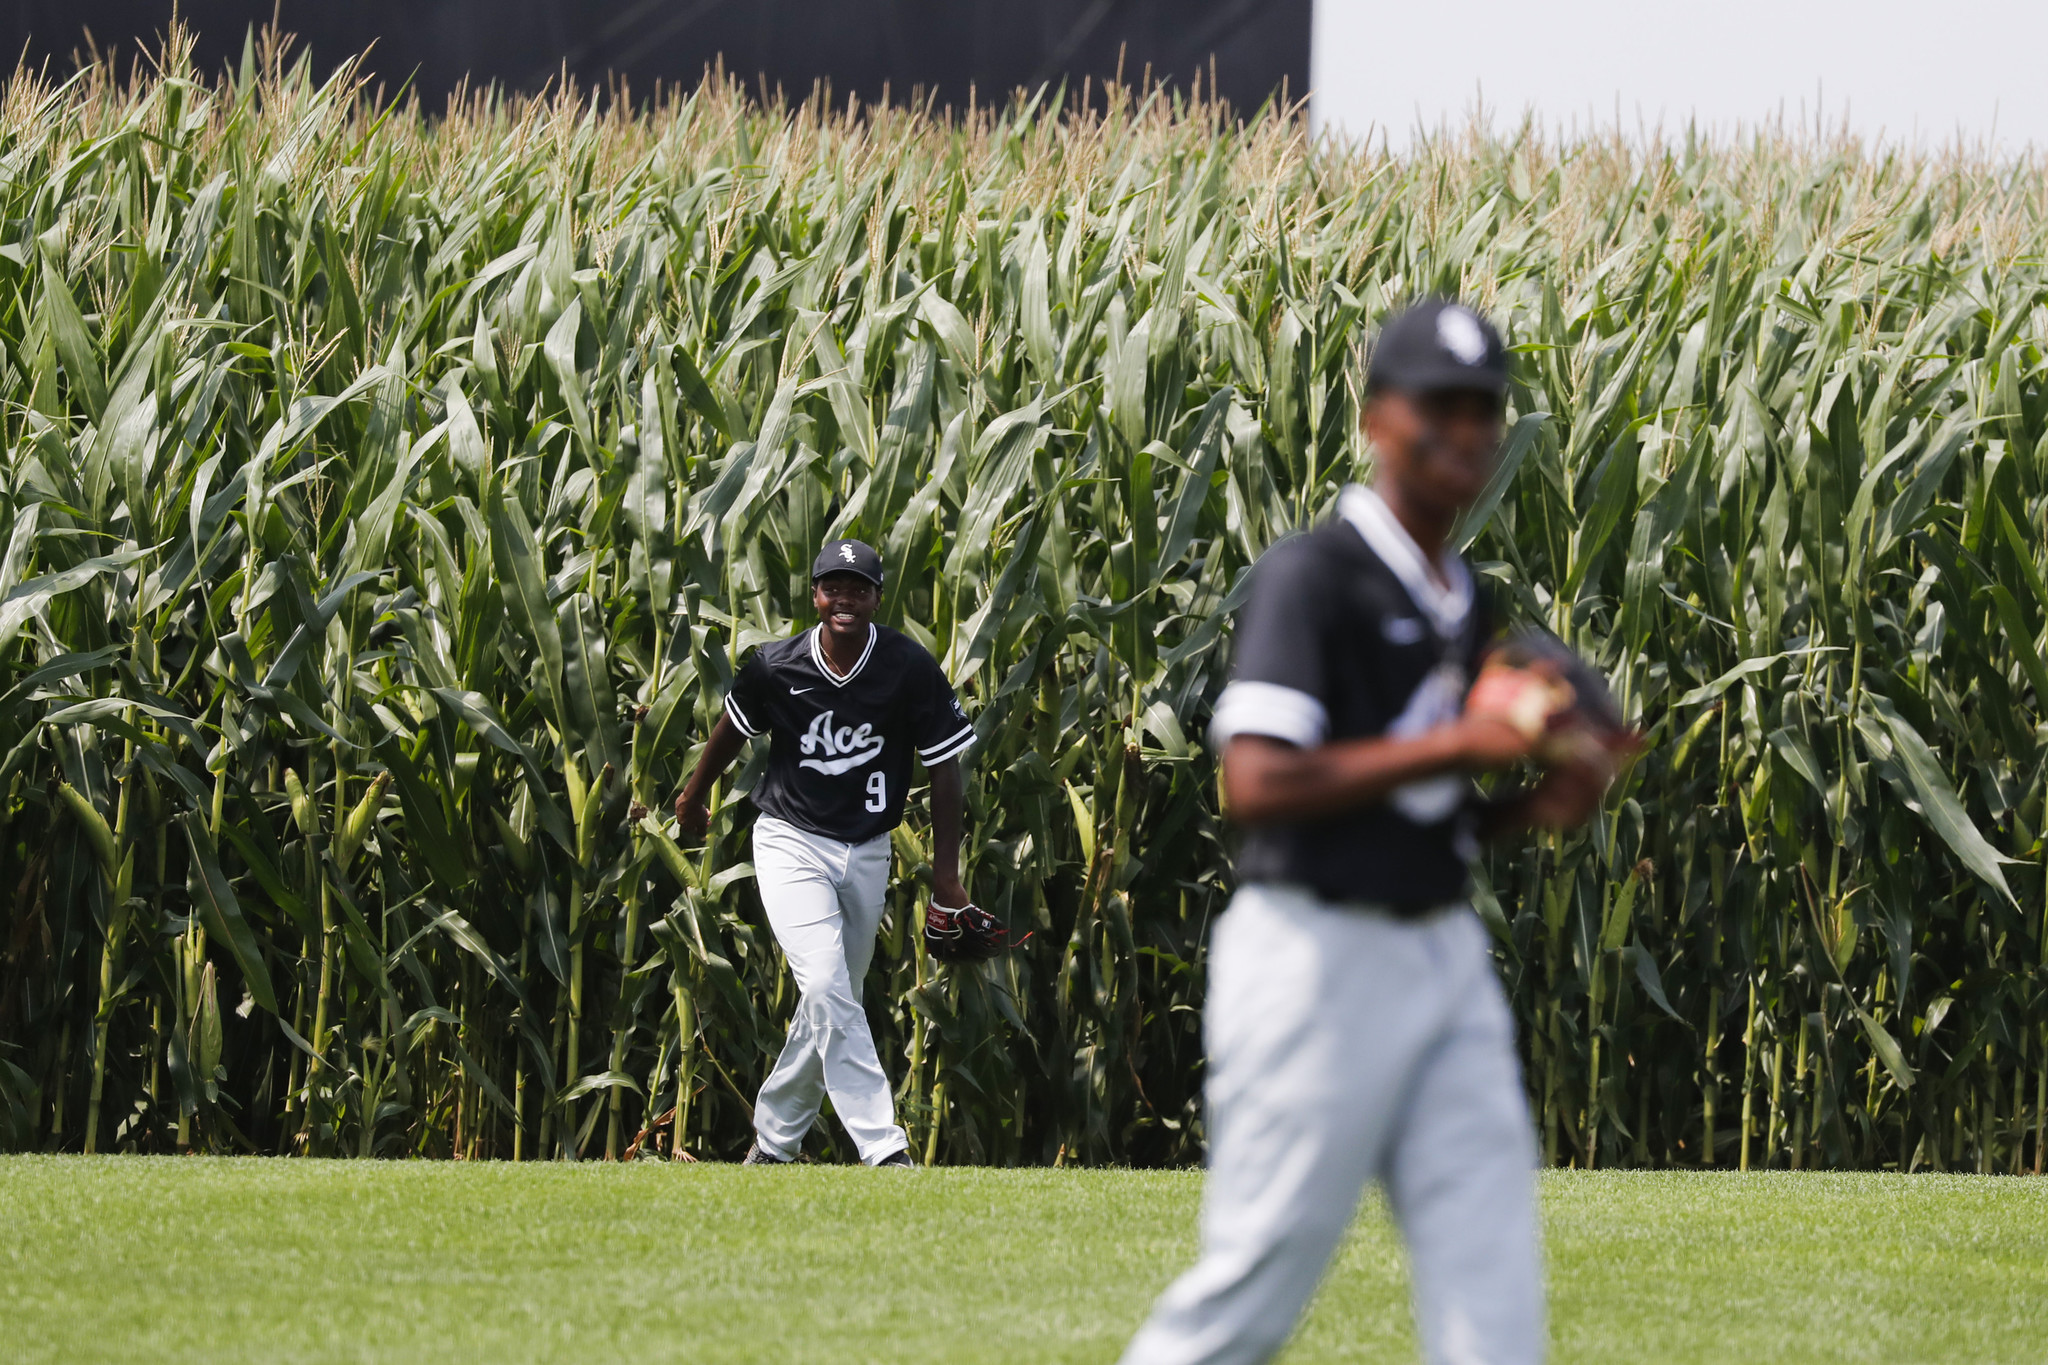 A Dream Fulfilled' Youth Game Great Lead-In to 'Field of Dreams' Game  Between White Sox and Yankees